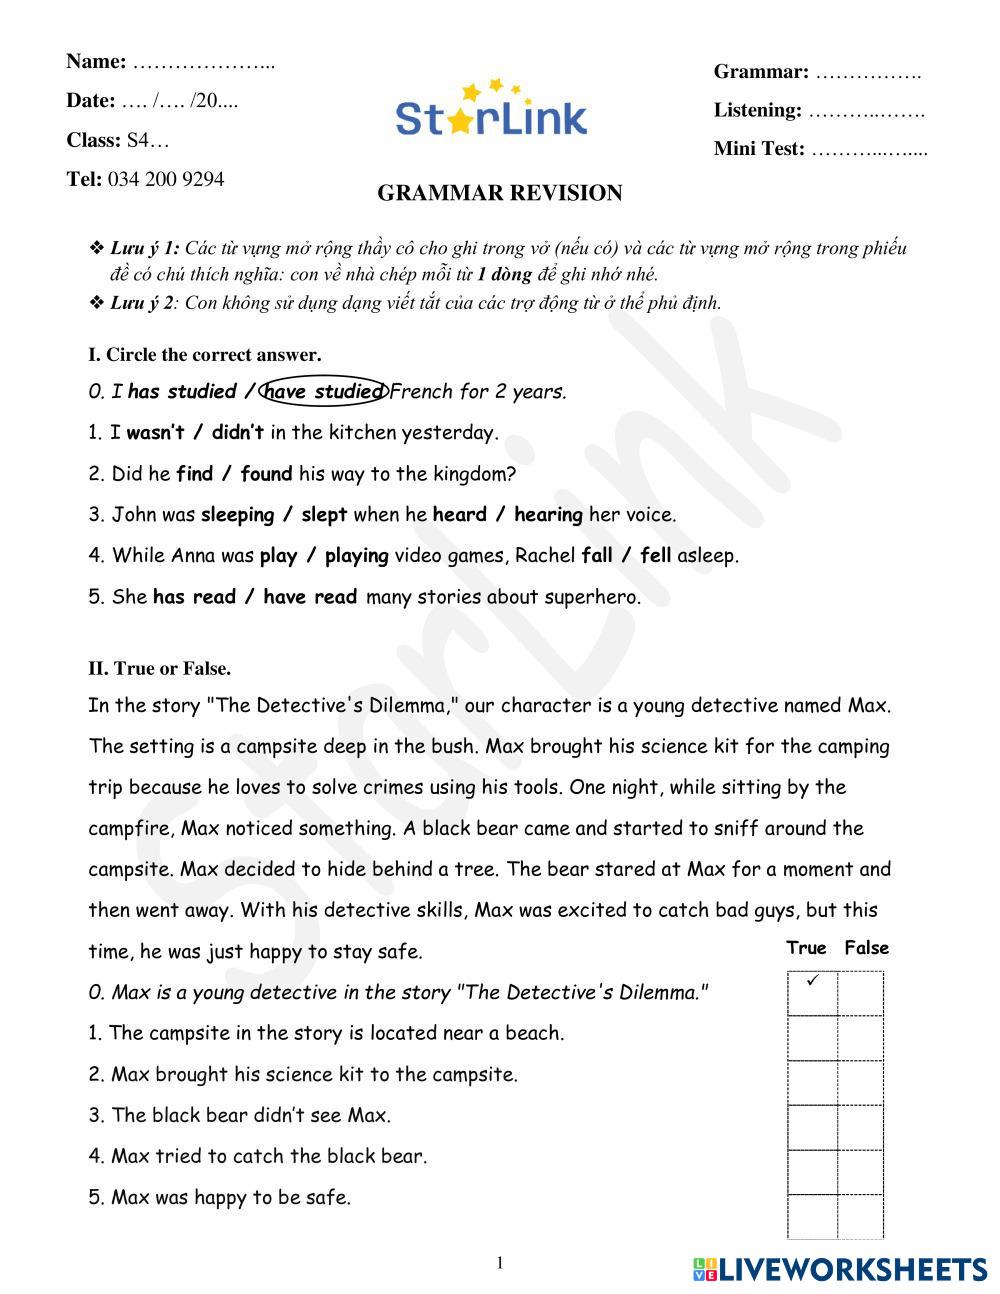 grammar revision worksheet with answers